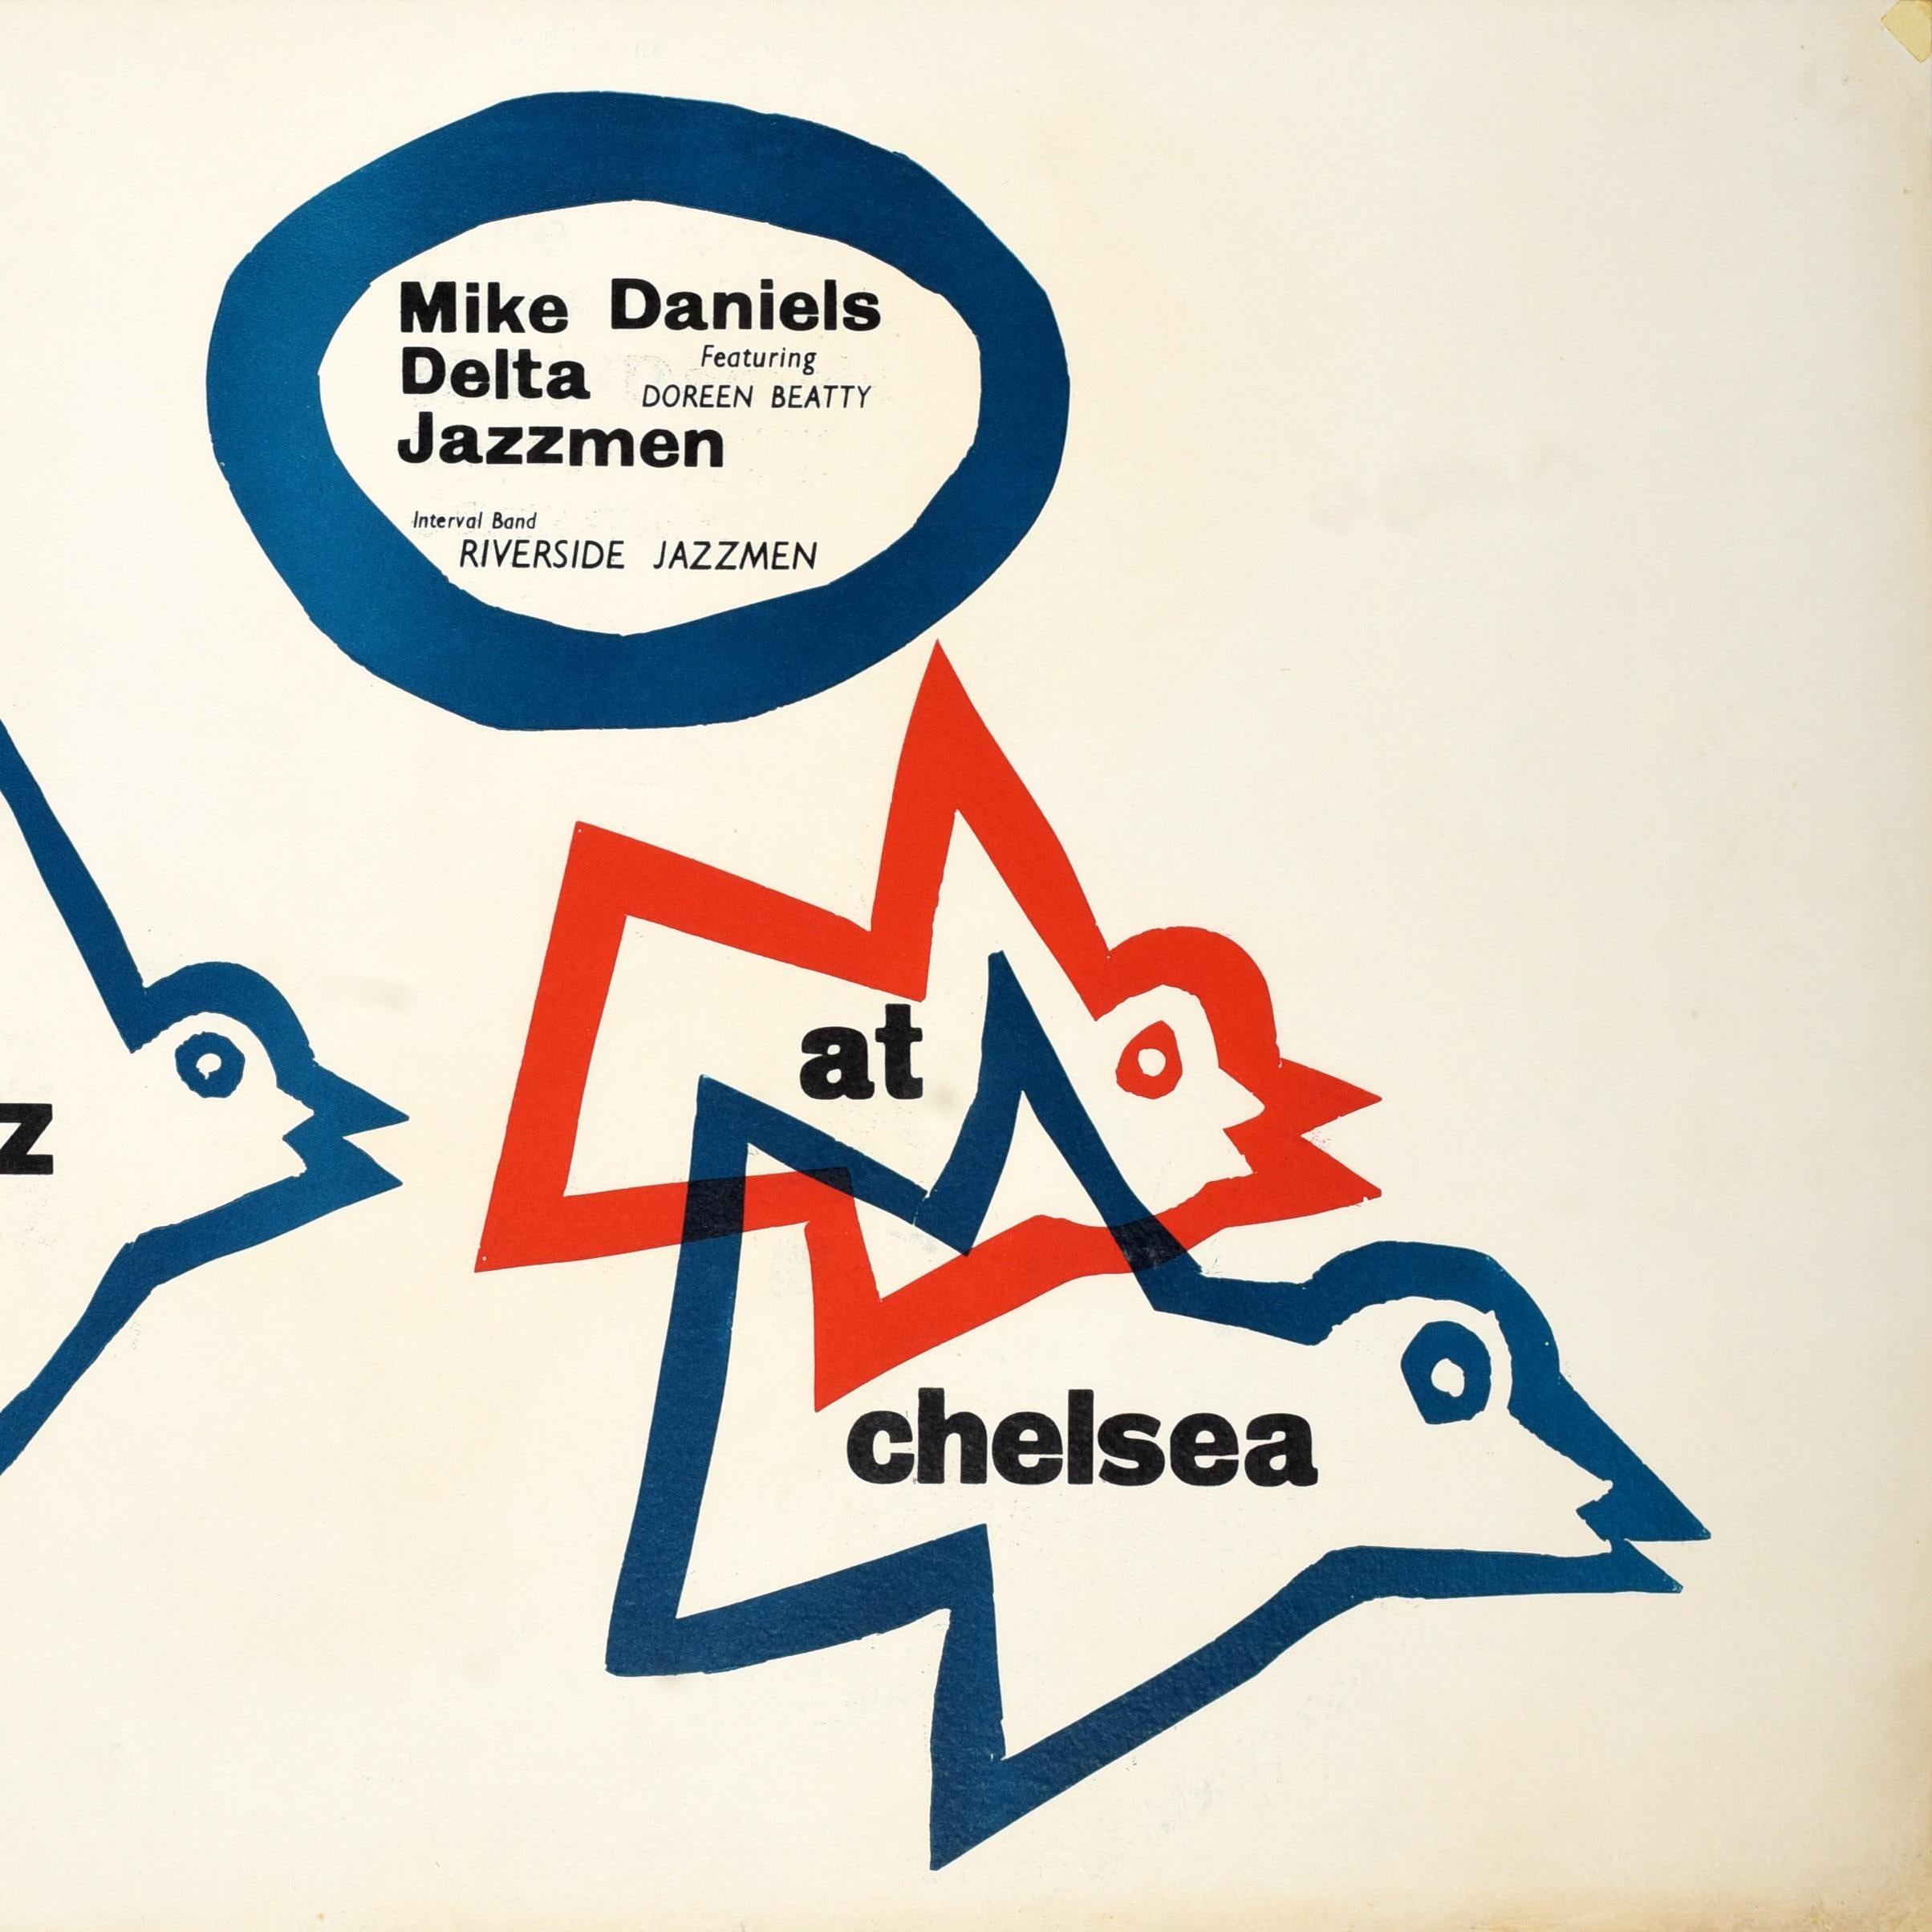 Original vintage music poster advertising a Jazz At Chelsea performance by Mike Daniels Delta Jazzmen featuring Doreen Beatty with an Interval Band the Riverside Jazzmen at Chelsea College Manresa Road SW3 on Saturday 12 November from 7:30-11:30